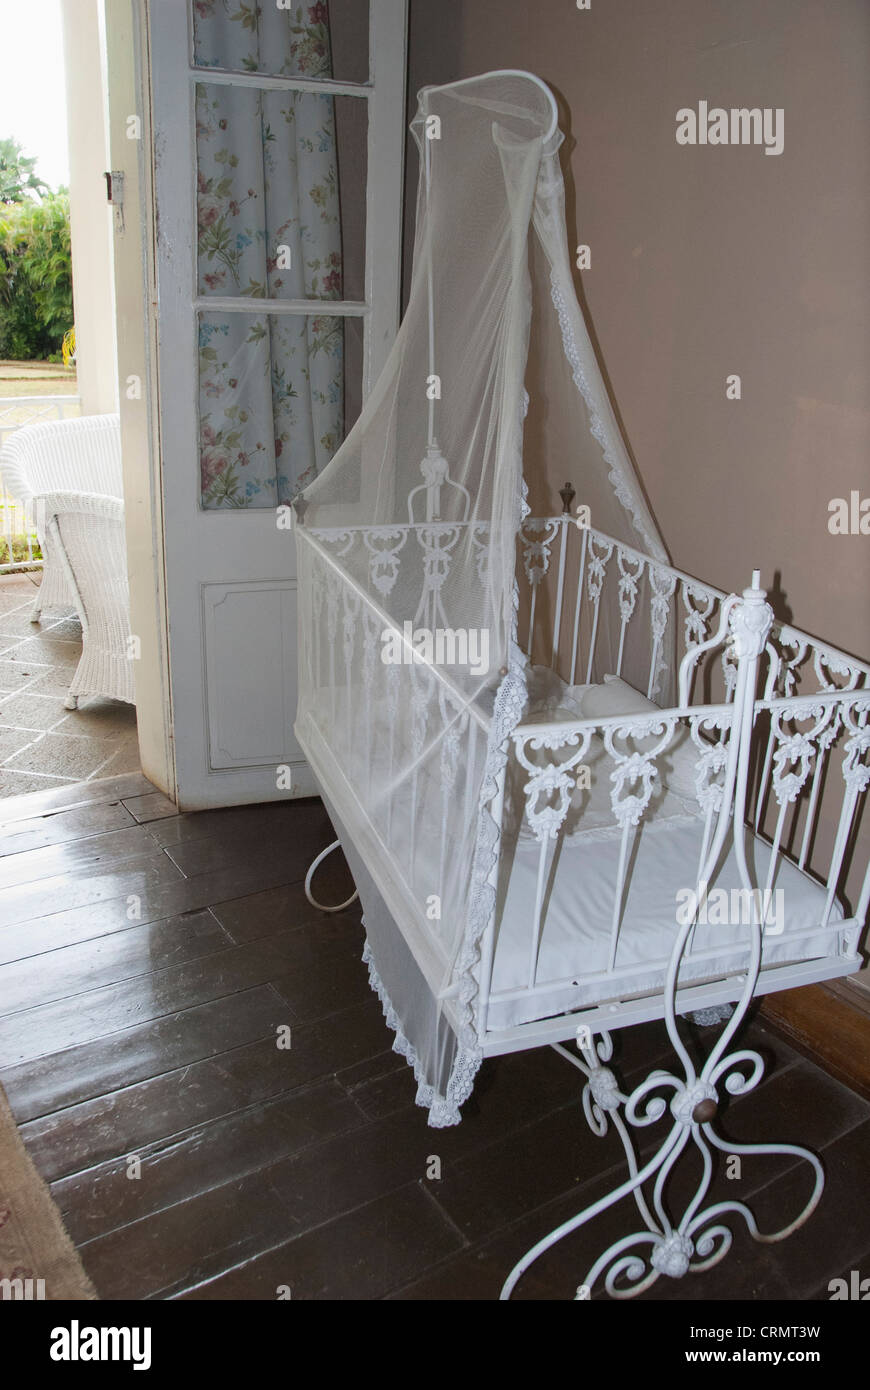 Island of Mauritius. Eureka House, fine restored colonial home built in 1834. Vintage baby cradle. Stock Photo